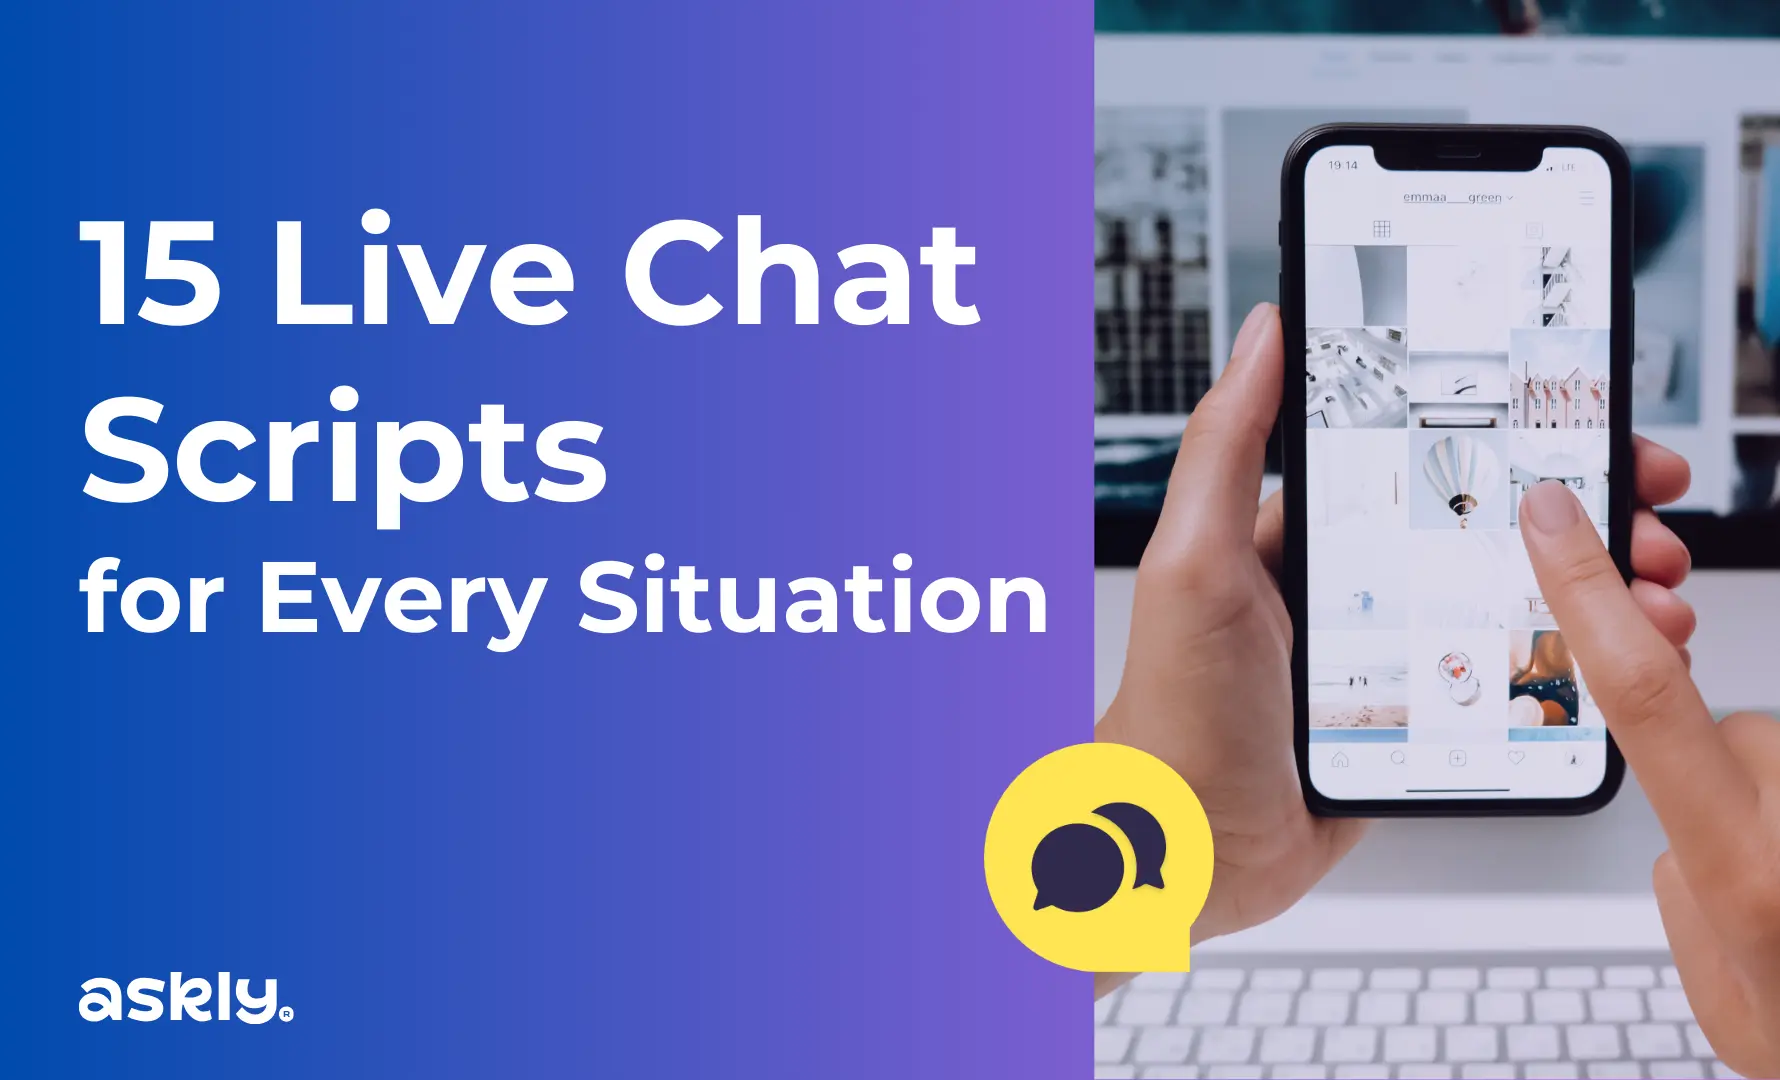 Elevating Customer Service: 15 Compelling Live Chat Scripts for Every Situation